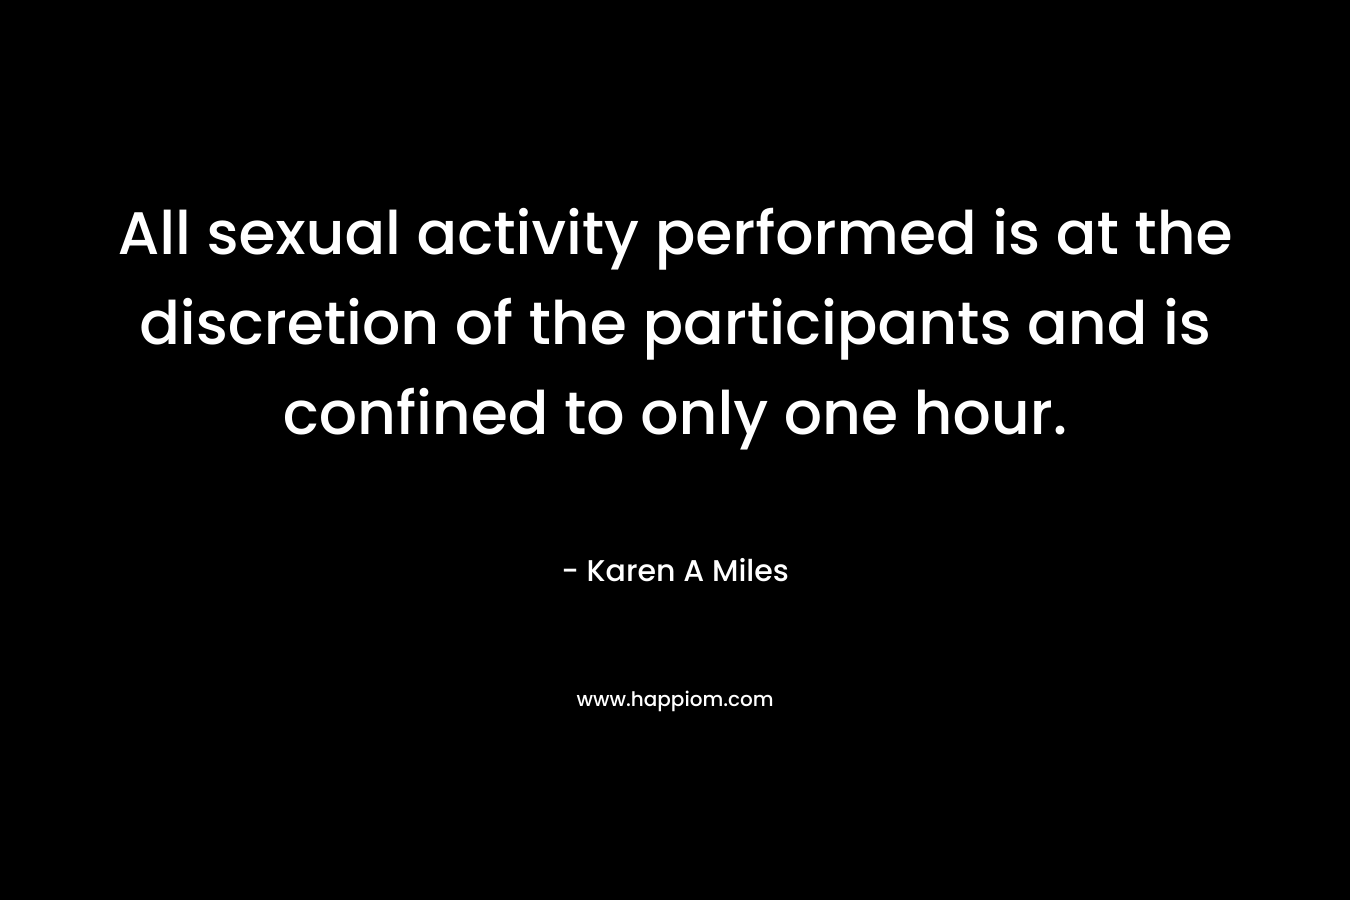 All sexual activity performed is at the discretion of the participants and is confined to only one hour. – Karen A Miles